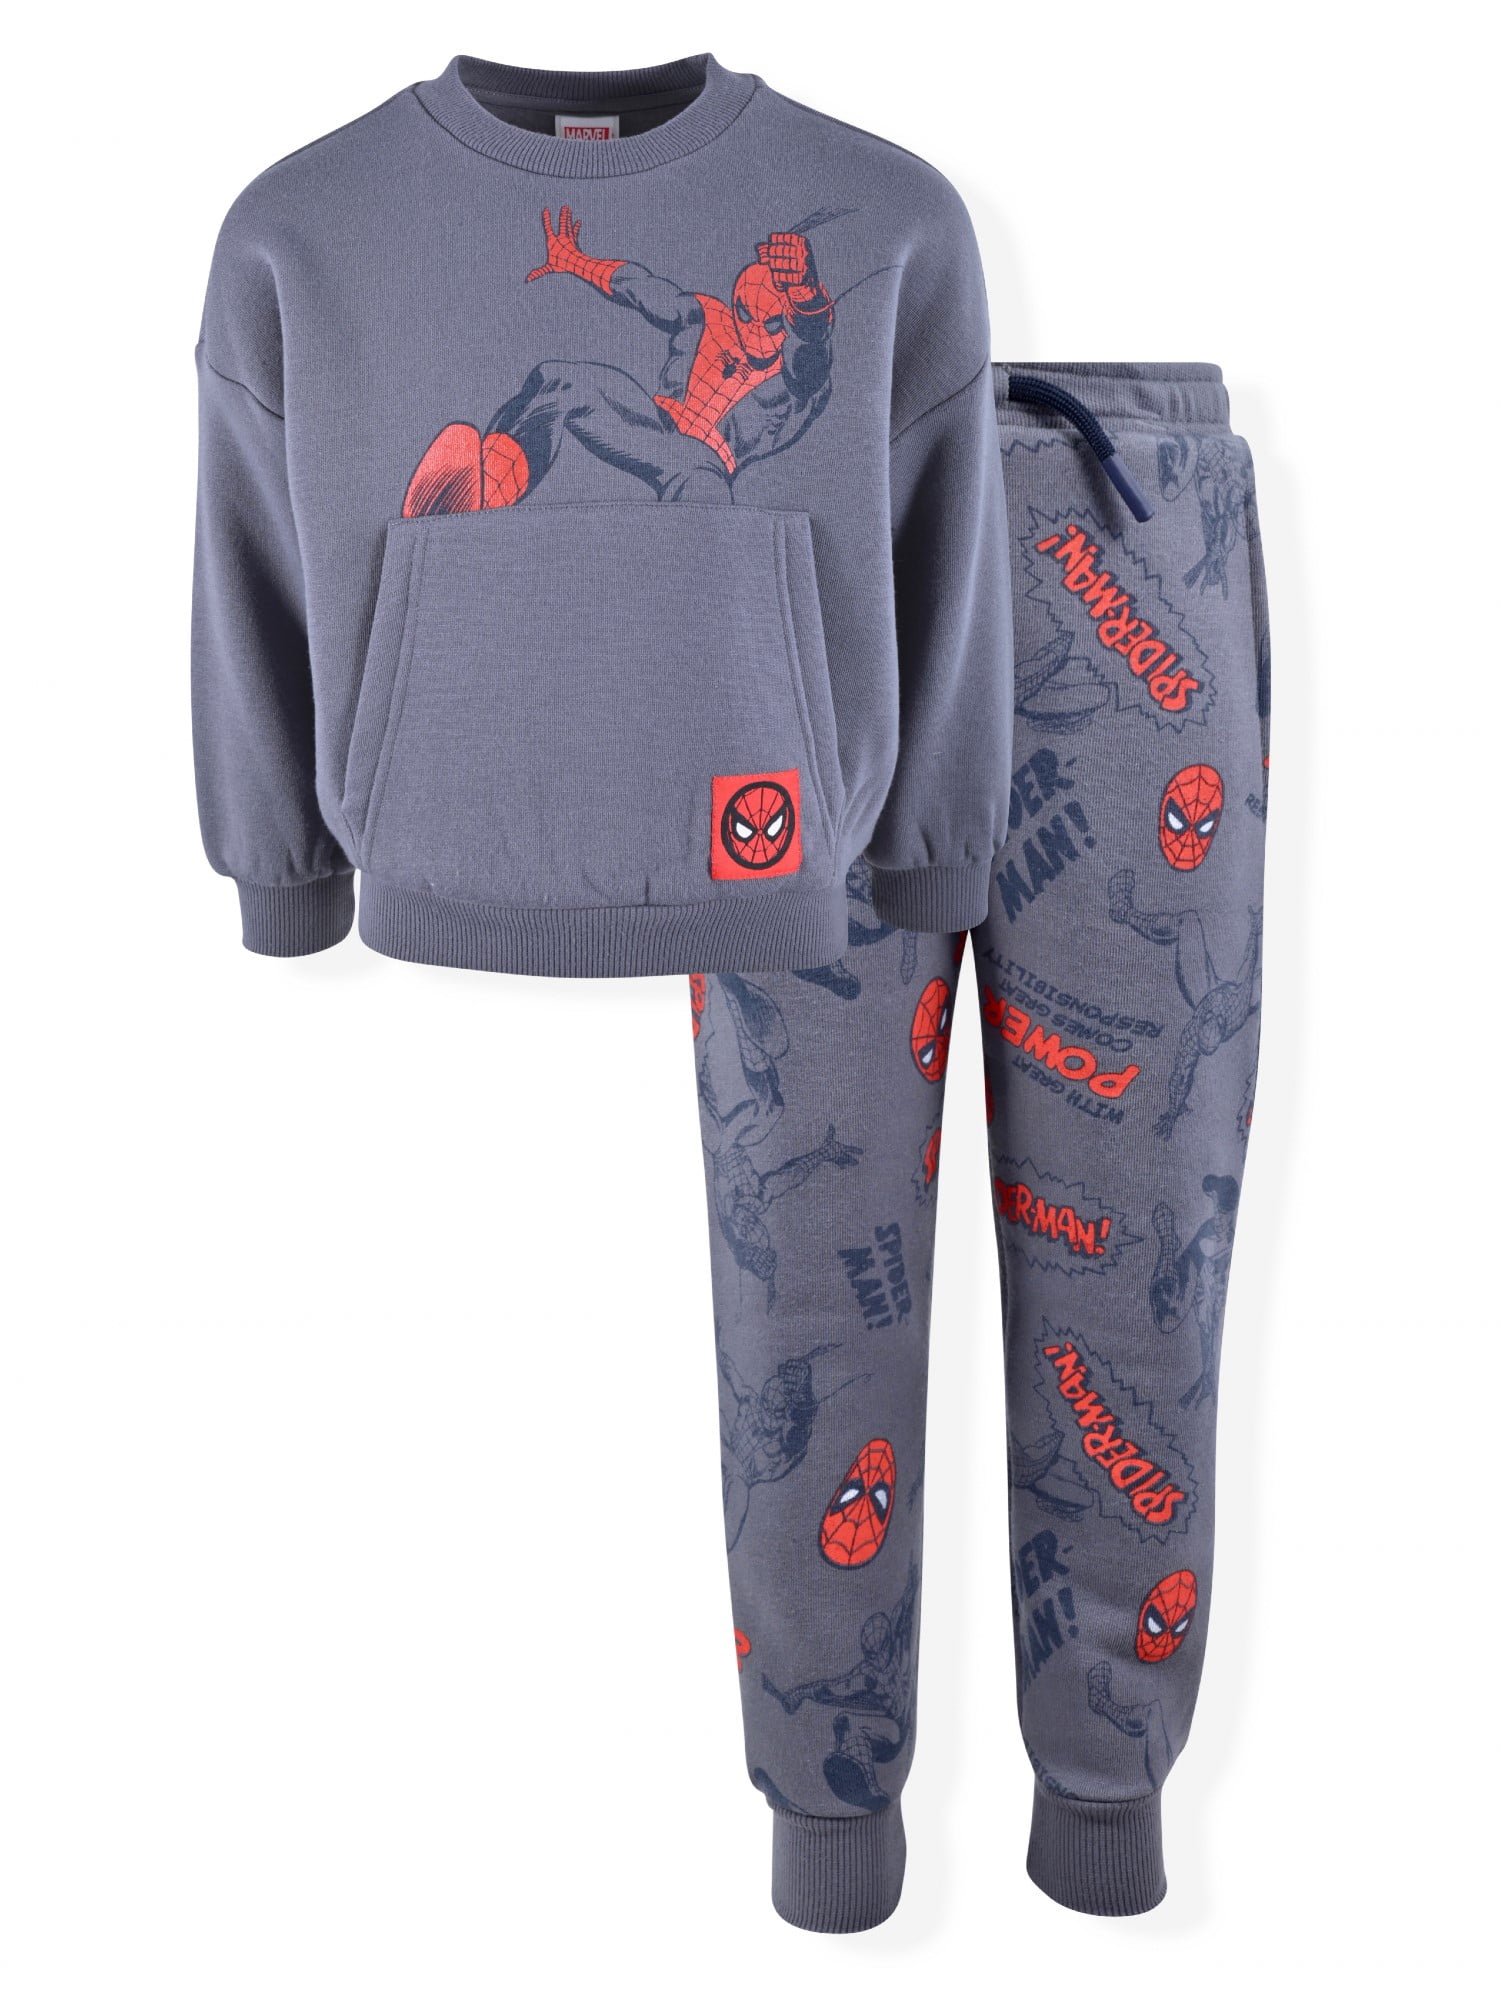 Spider-Man Spiderman Baby and Toddler Boy Fleece Sweatshirt and Jogger Outfit Set, 2-Piece, Sizes 12M-5T